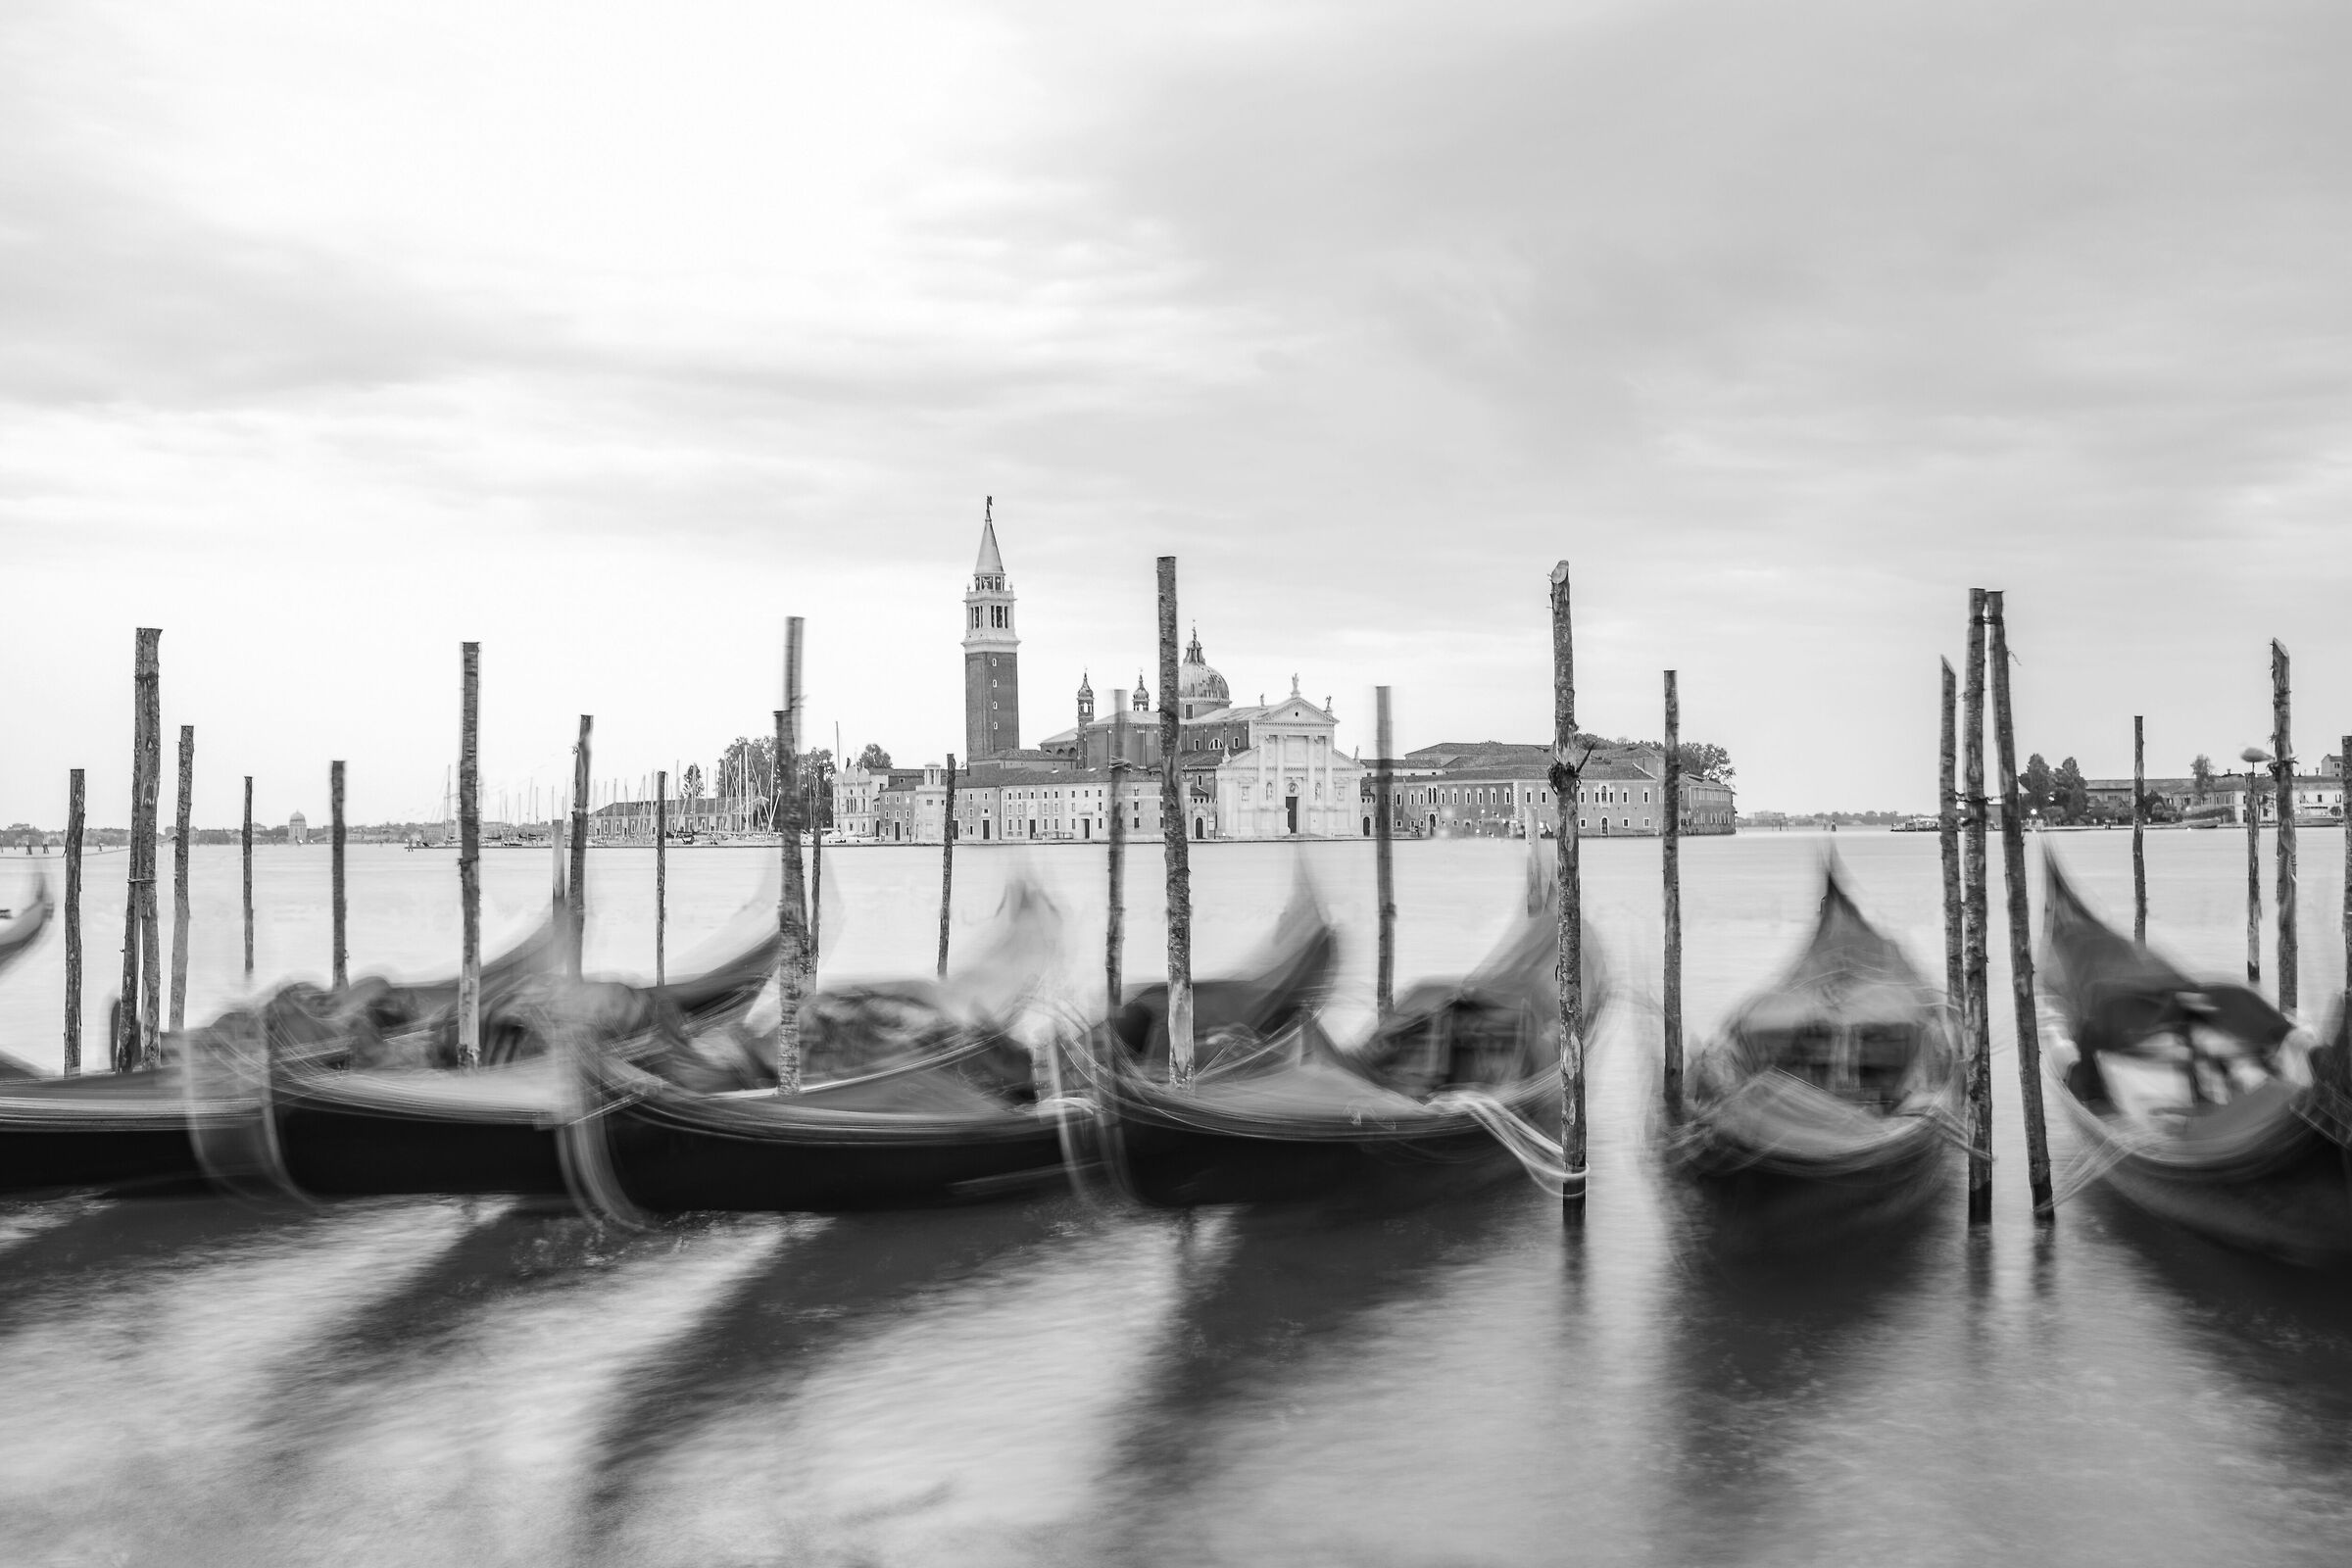 Venice waits in silence for everything to begin again...